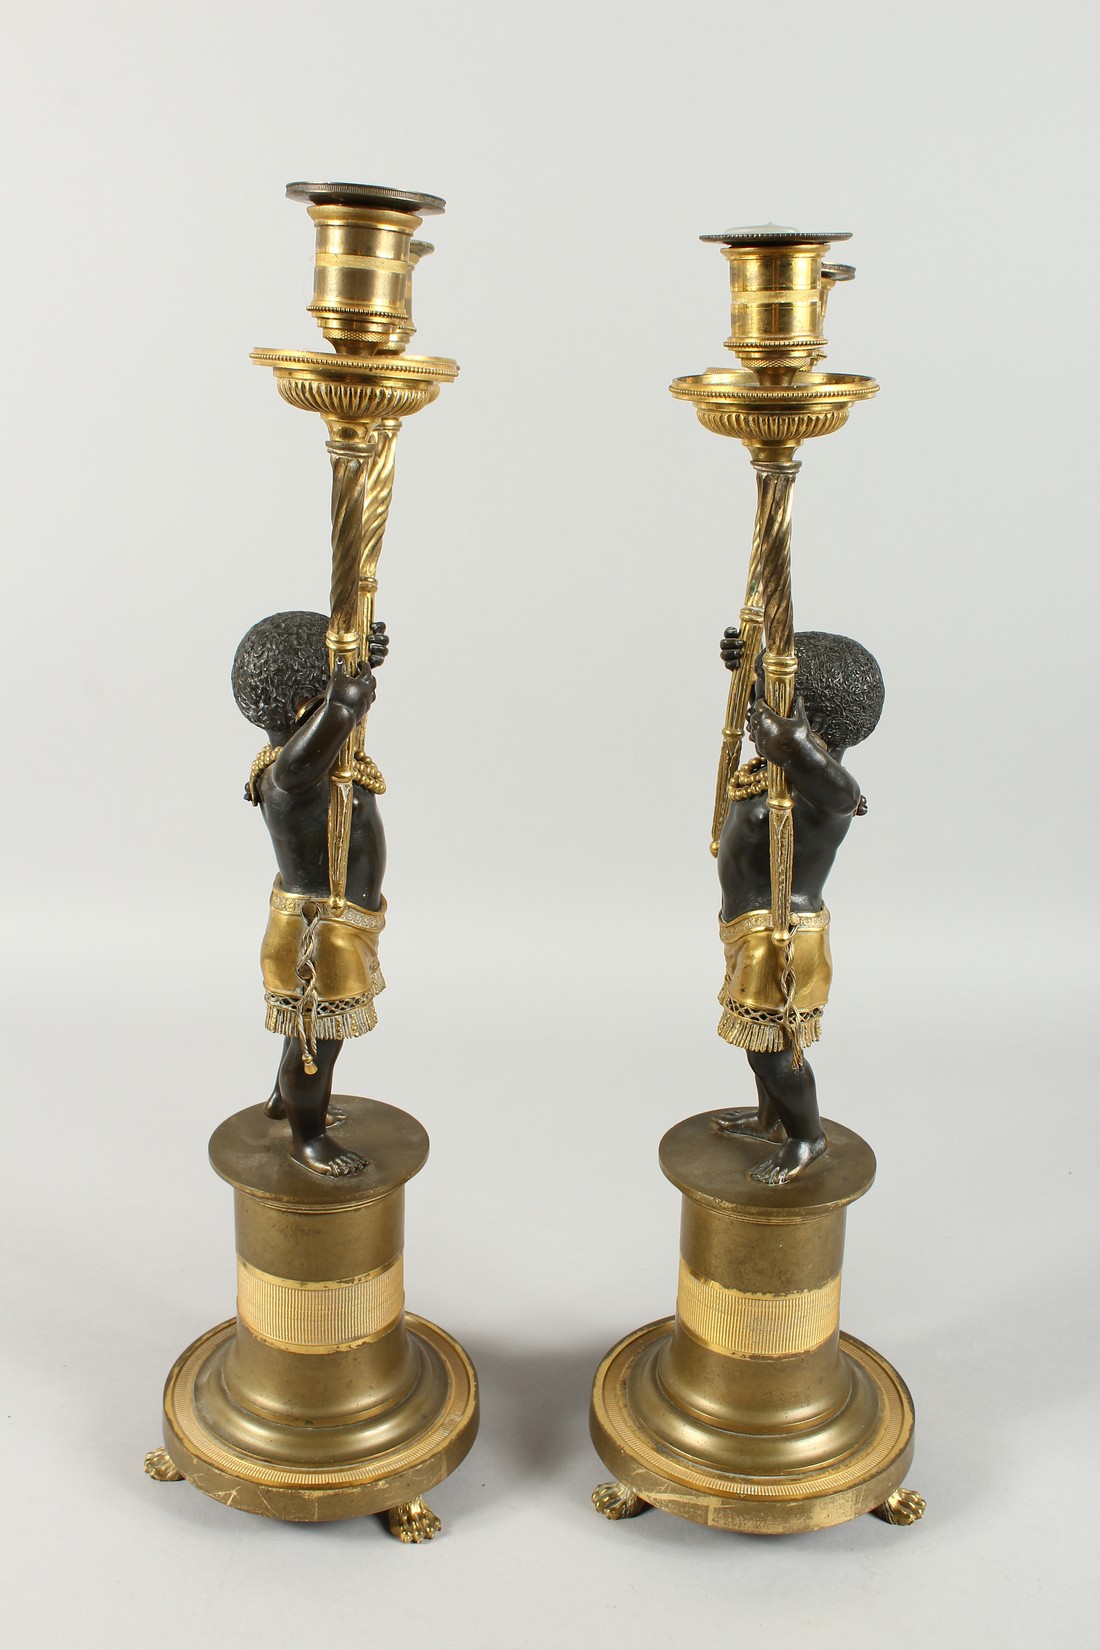 A SUPERB PAIR OF EMPIRE BRONZE AND GILT BRONZE TWO BRANCH CANDLESTICKS of nubian children holding - Image 6 of 9